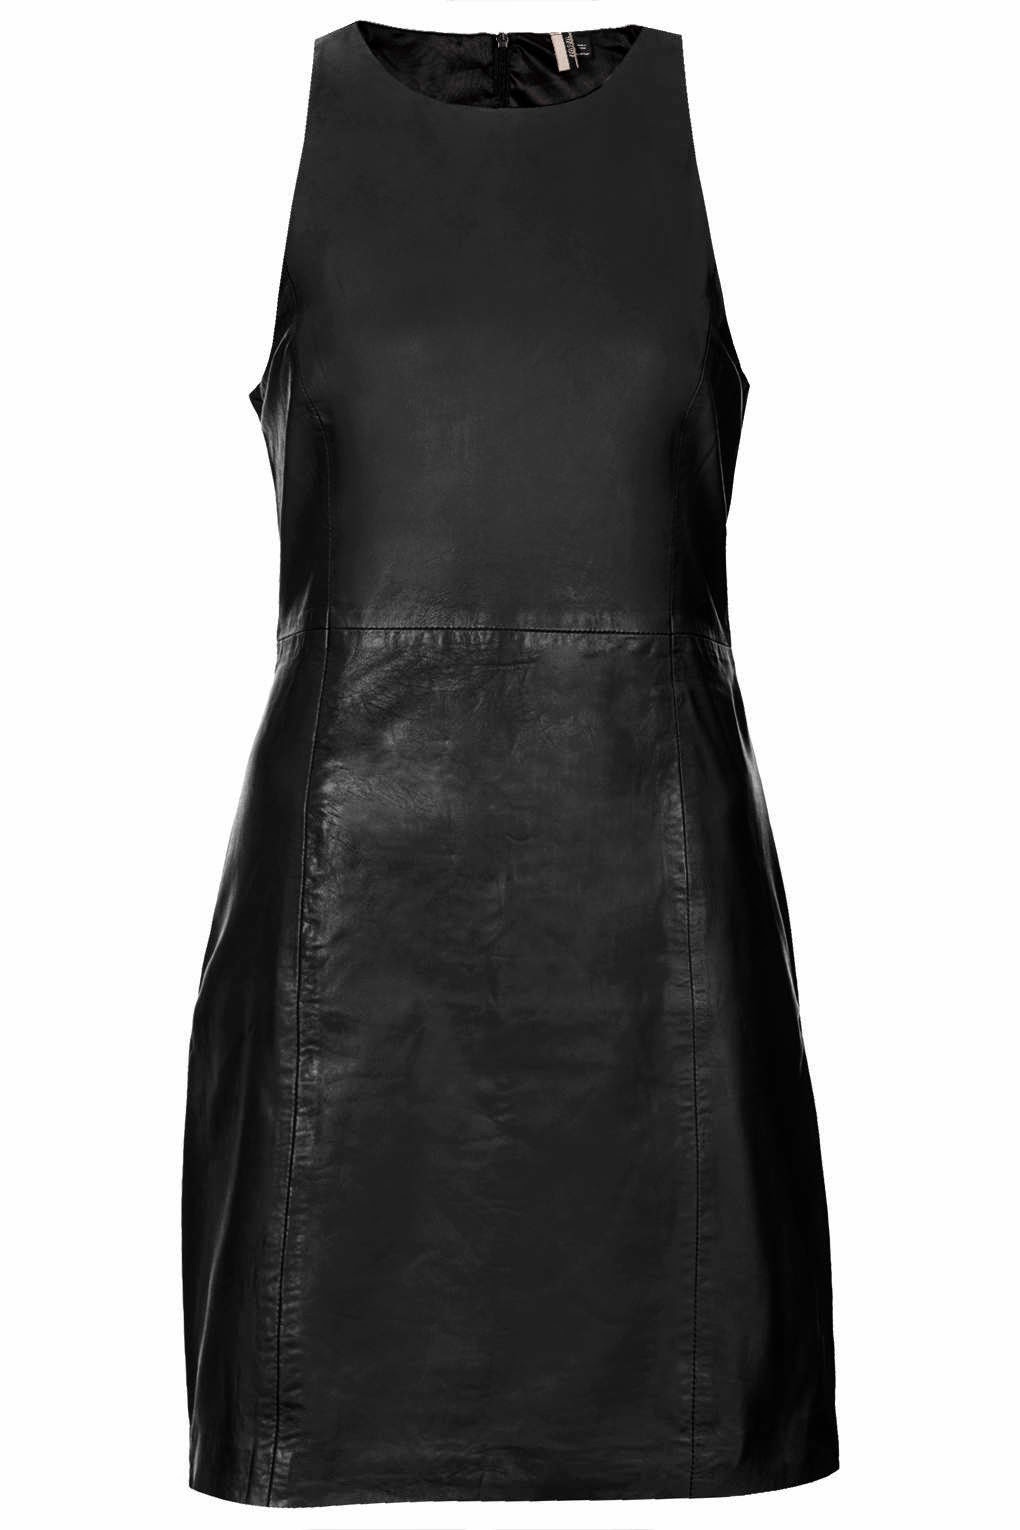 Lust of the week: Topshop premium leather shift dress | Style Trunk